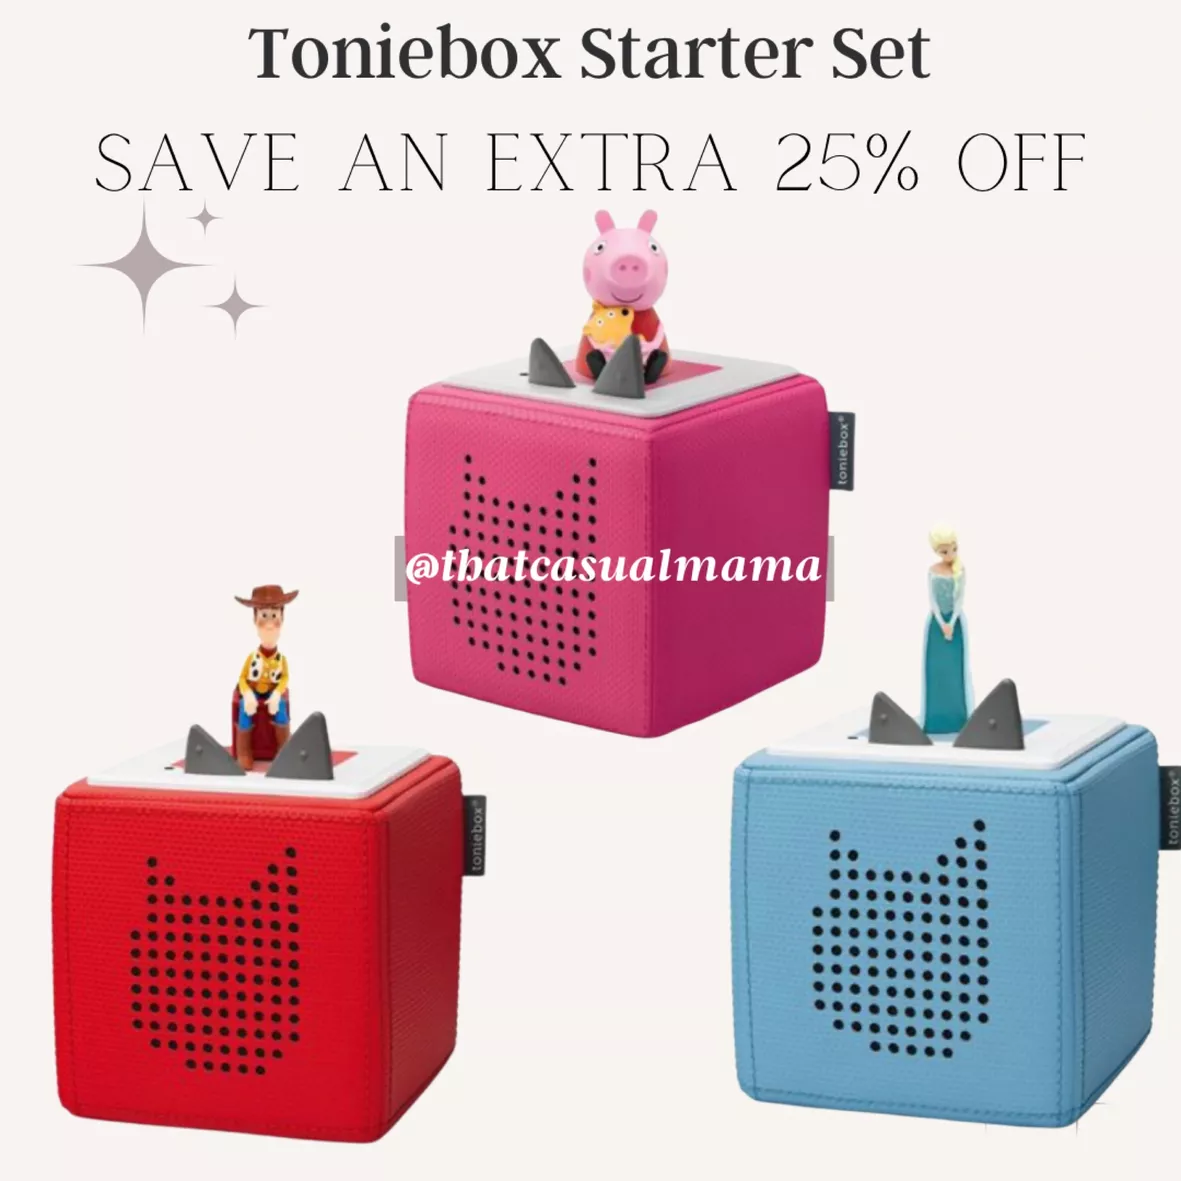 Toniebox Starter Set - Things They Love